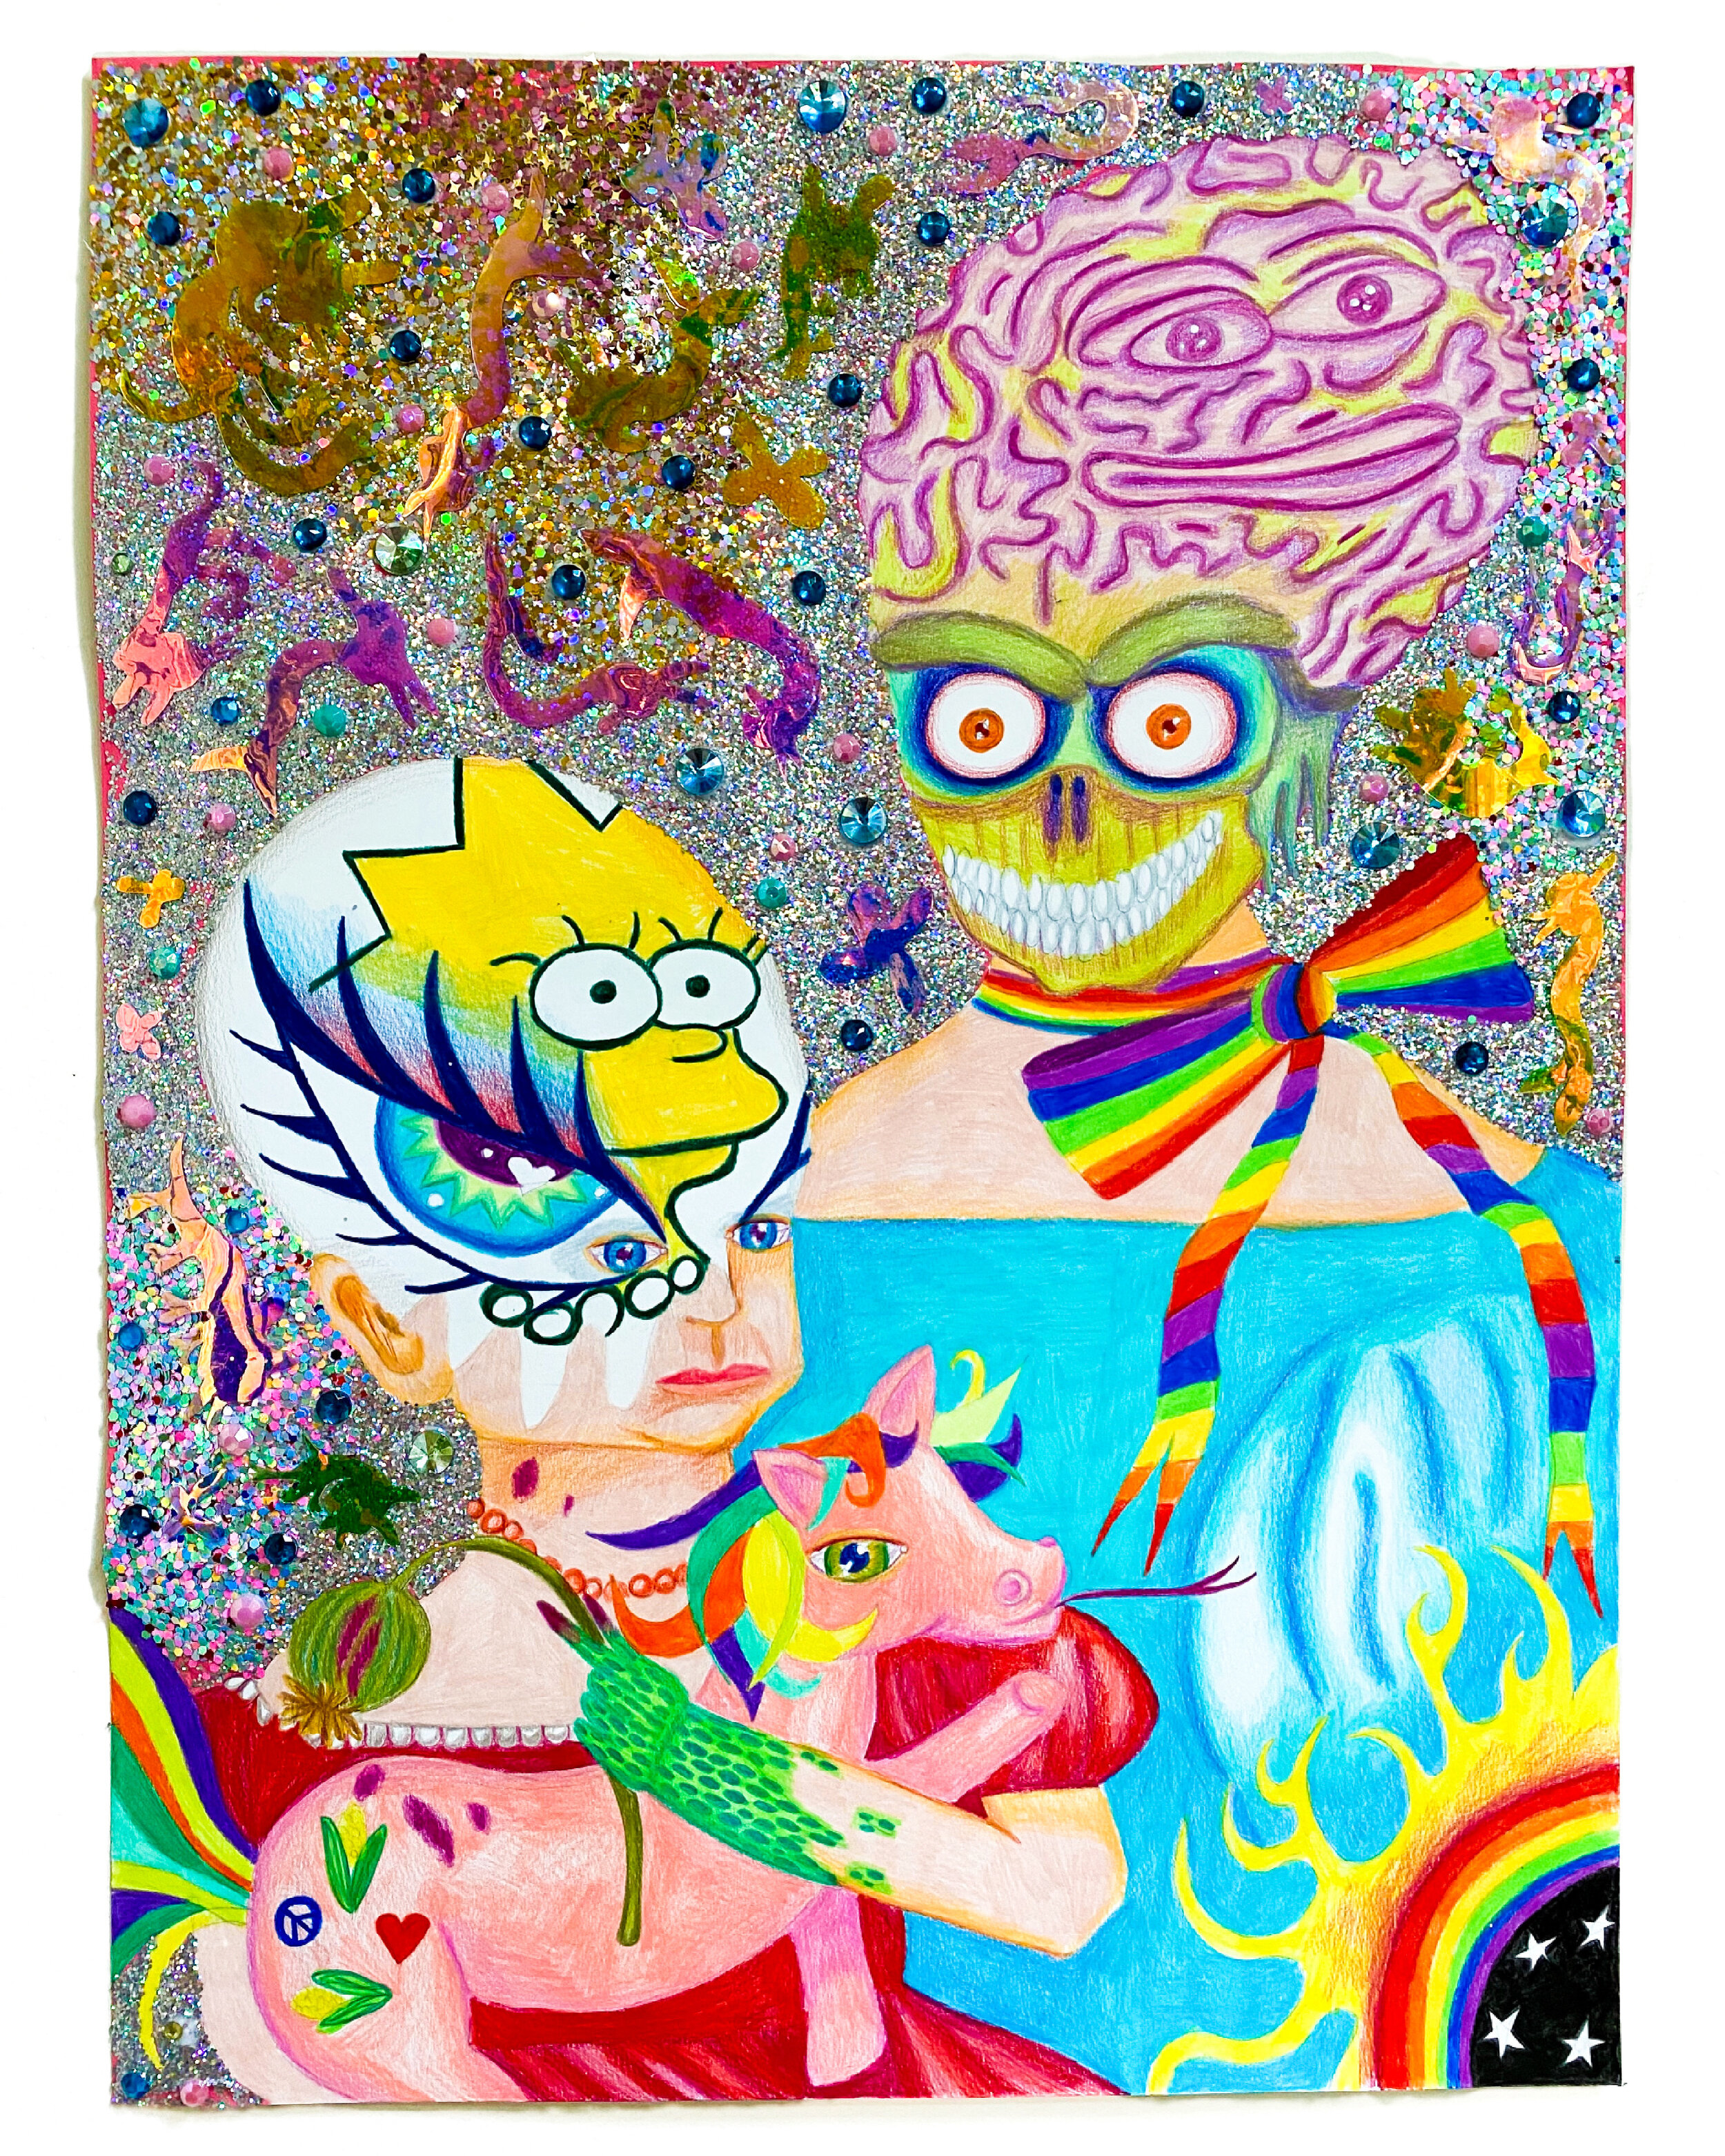   Mother Holding Baby with Lisa Simpson Face Paint Holding a Plastic Pony and Poppy,  2021  24 x 18 inches (60.9 x 45.7 cm.)  Colored pencil, acrylic paint, Elmer's glue, Modge Podge, custom sequins, plastic gems and glitter on paper  Private collect